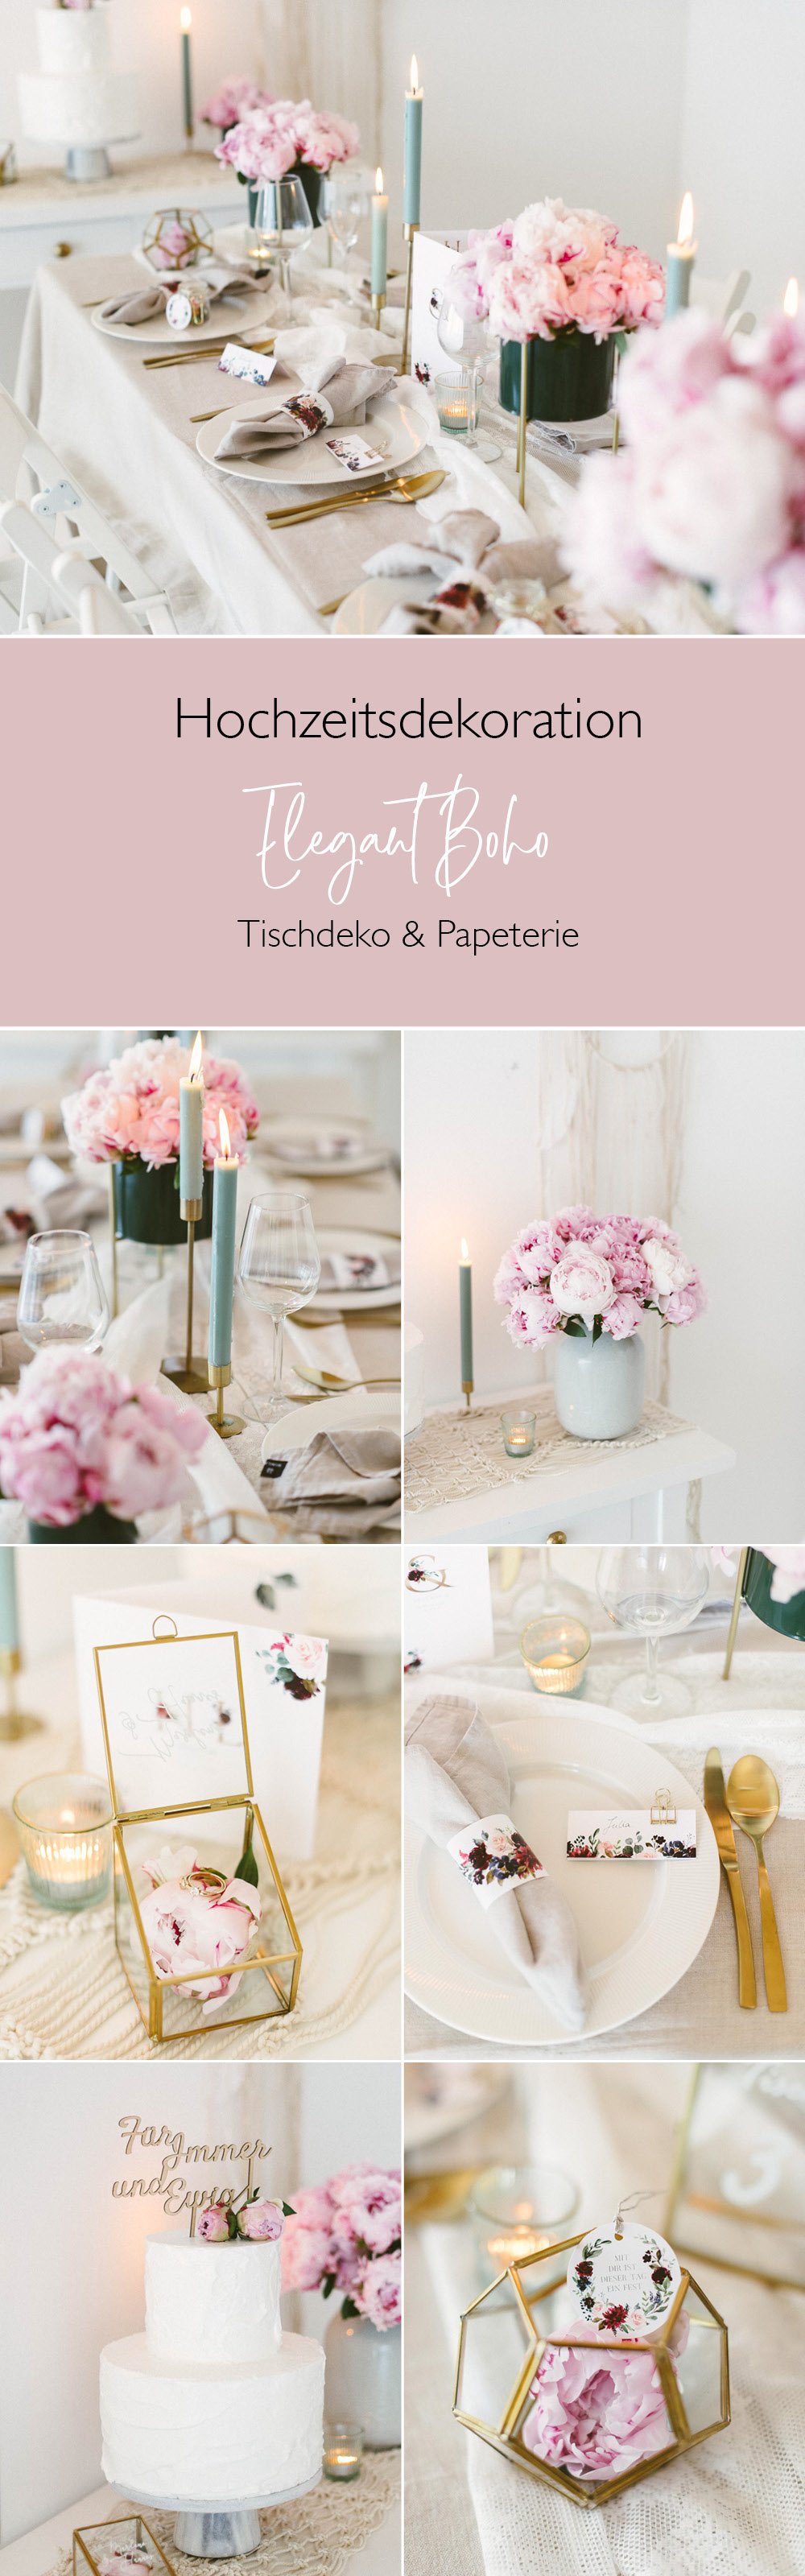 1646664911 253 Wedding decoration with peonies in an elegant boho style - Wedding decoration with peonies in an elegant boho style